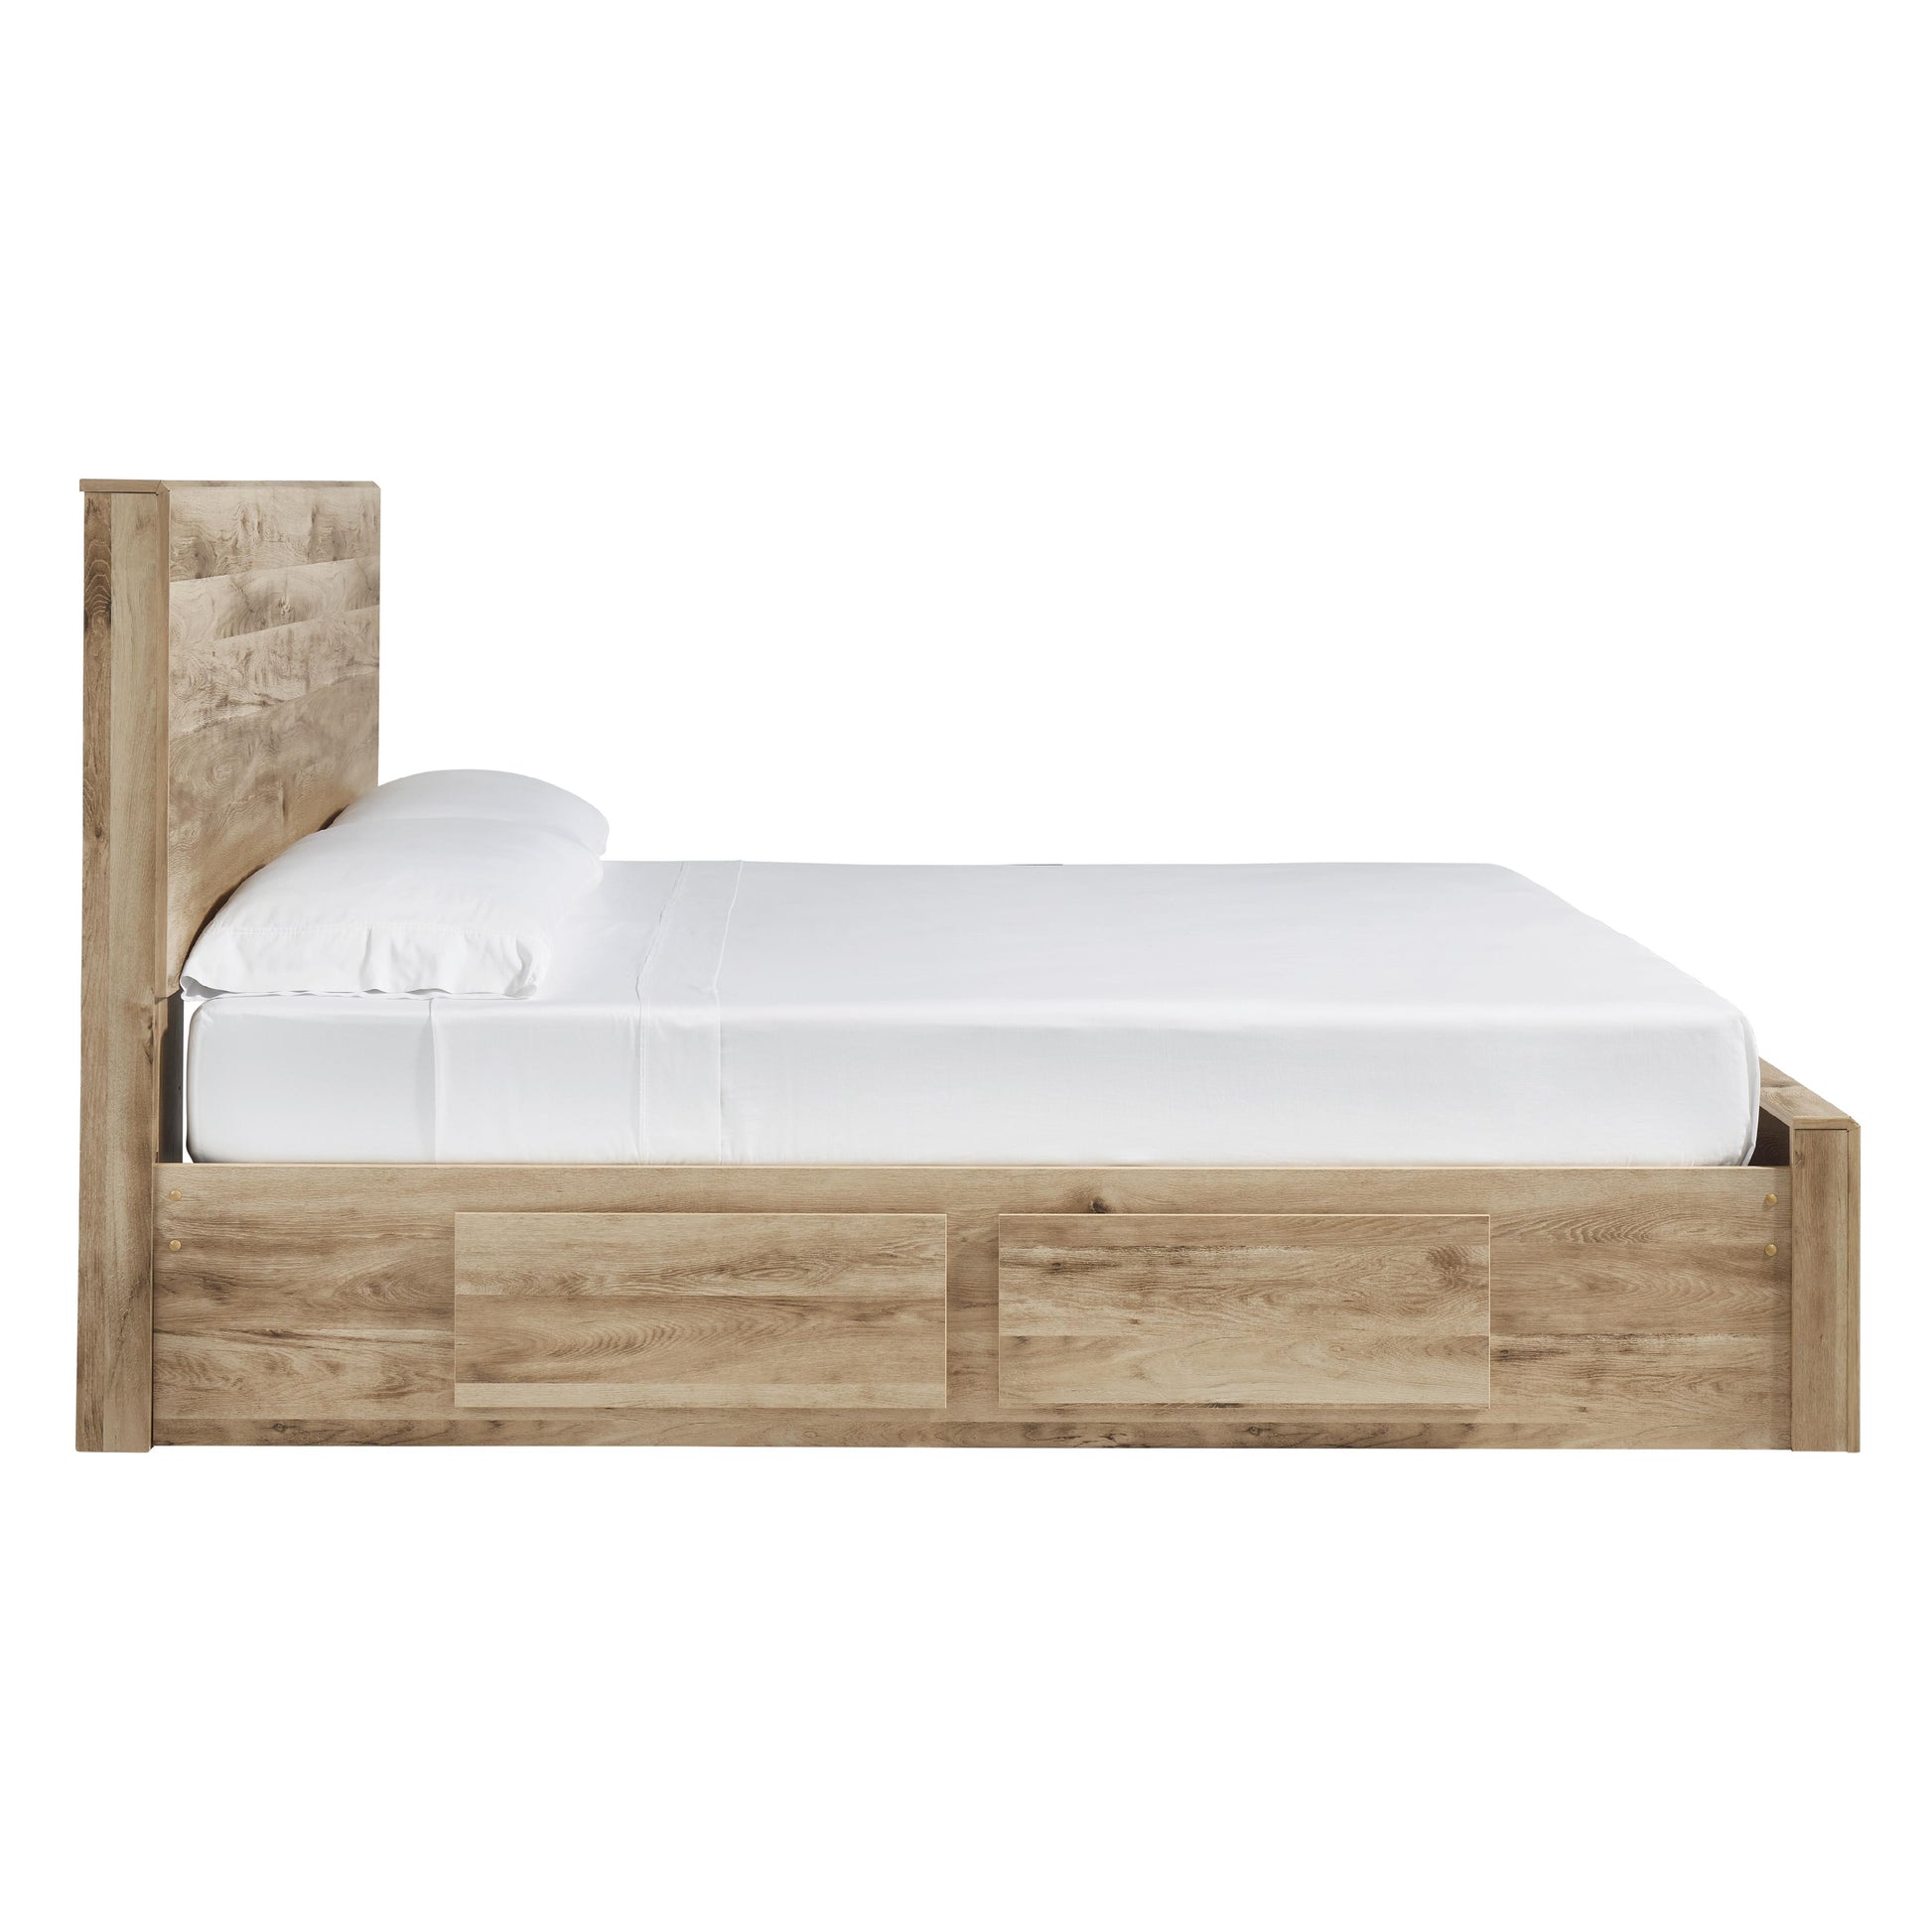 Signature Design by Ashley Hyanna King Panel Bed with Storage B1050-58/B1050-56S/B1050-60/B1050-95/B100-14 IMAGE 3